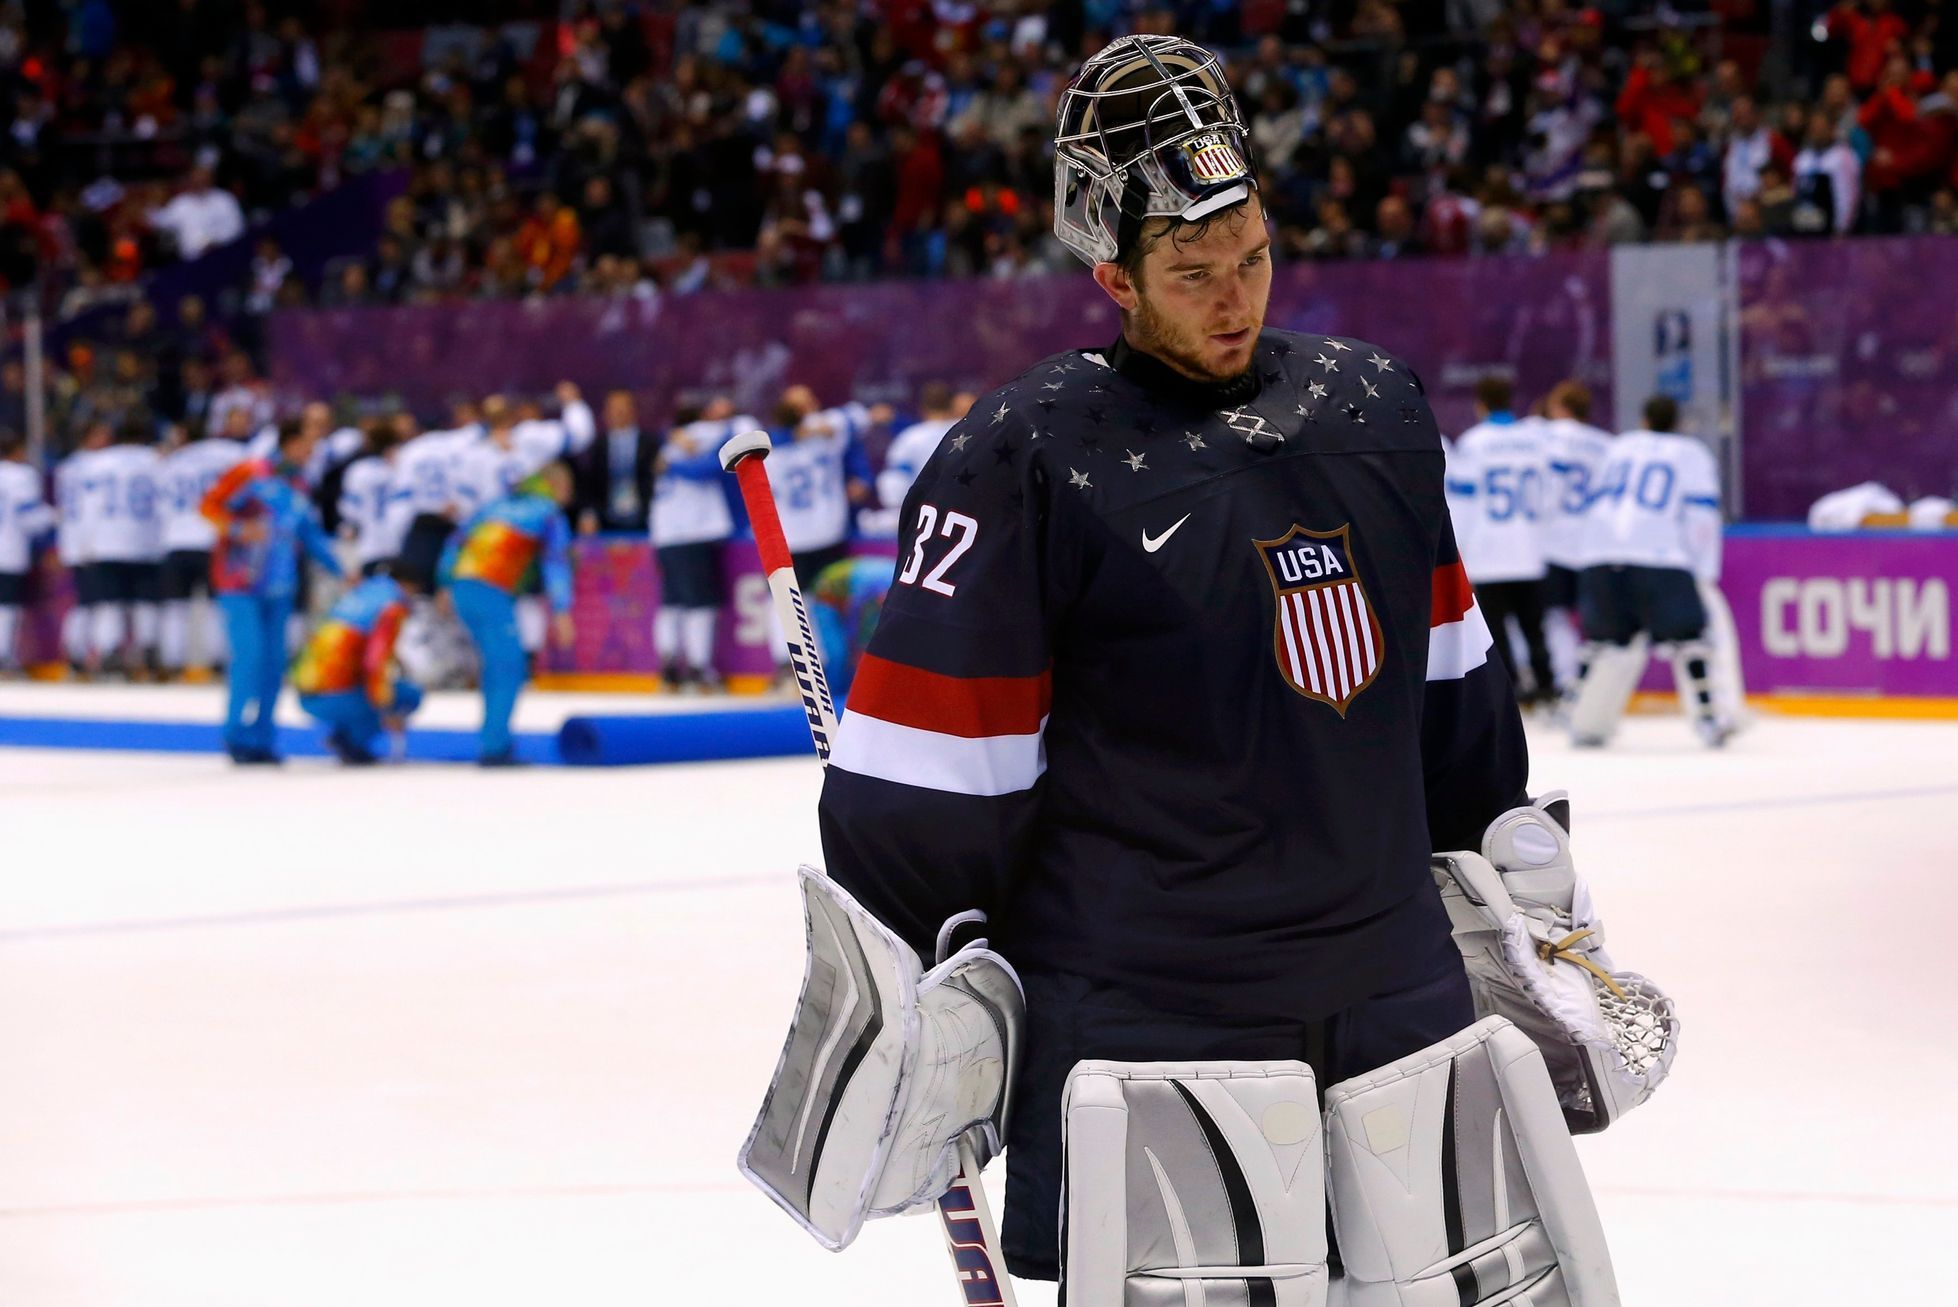 Team USA's goalie Quick leaves the ice after being defeated by Finland during the third period of their men's ice hockey bronze medal game at the Sochi 2014 Winter Olympic Games